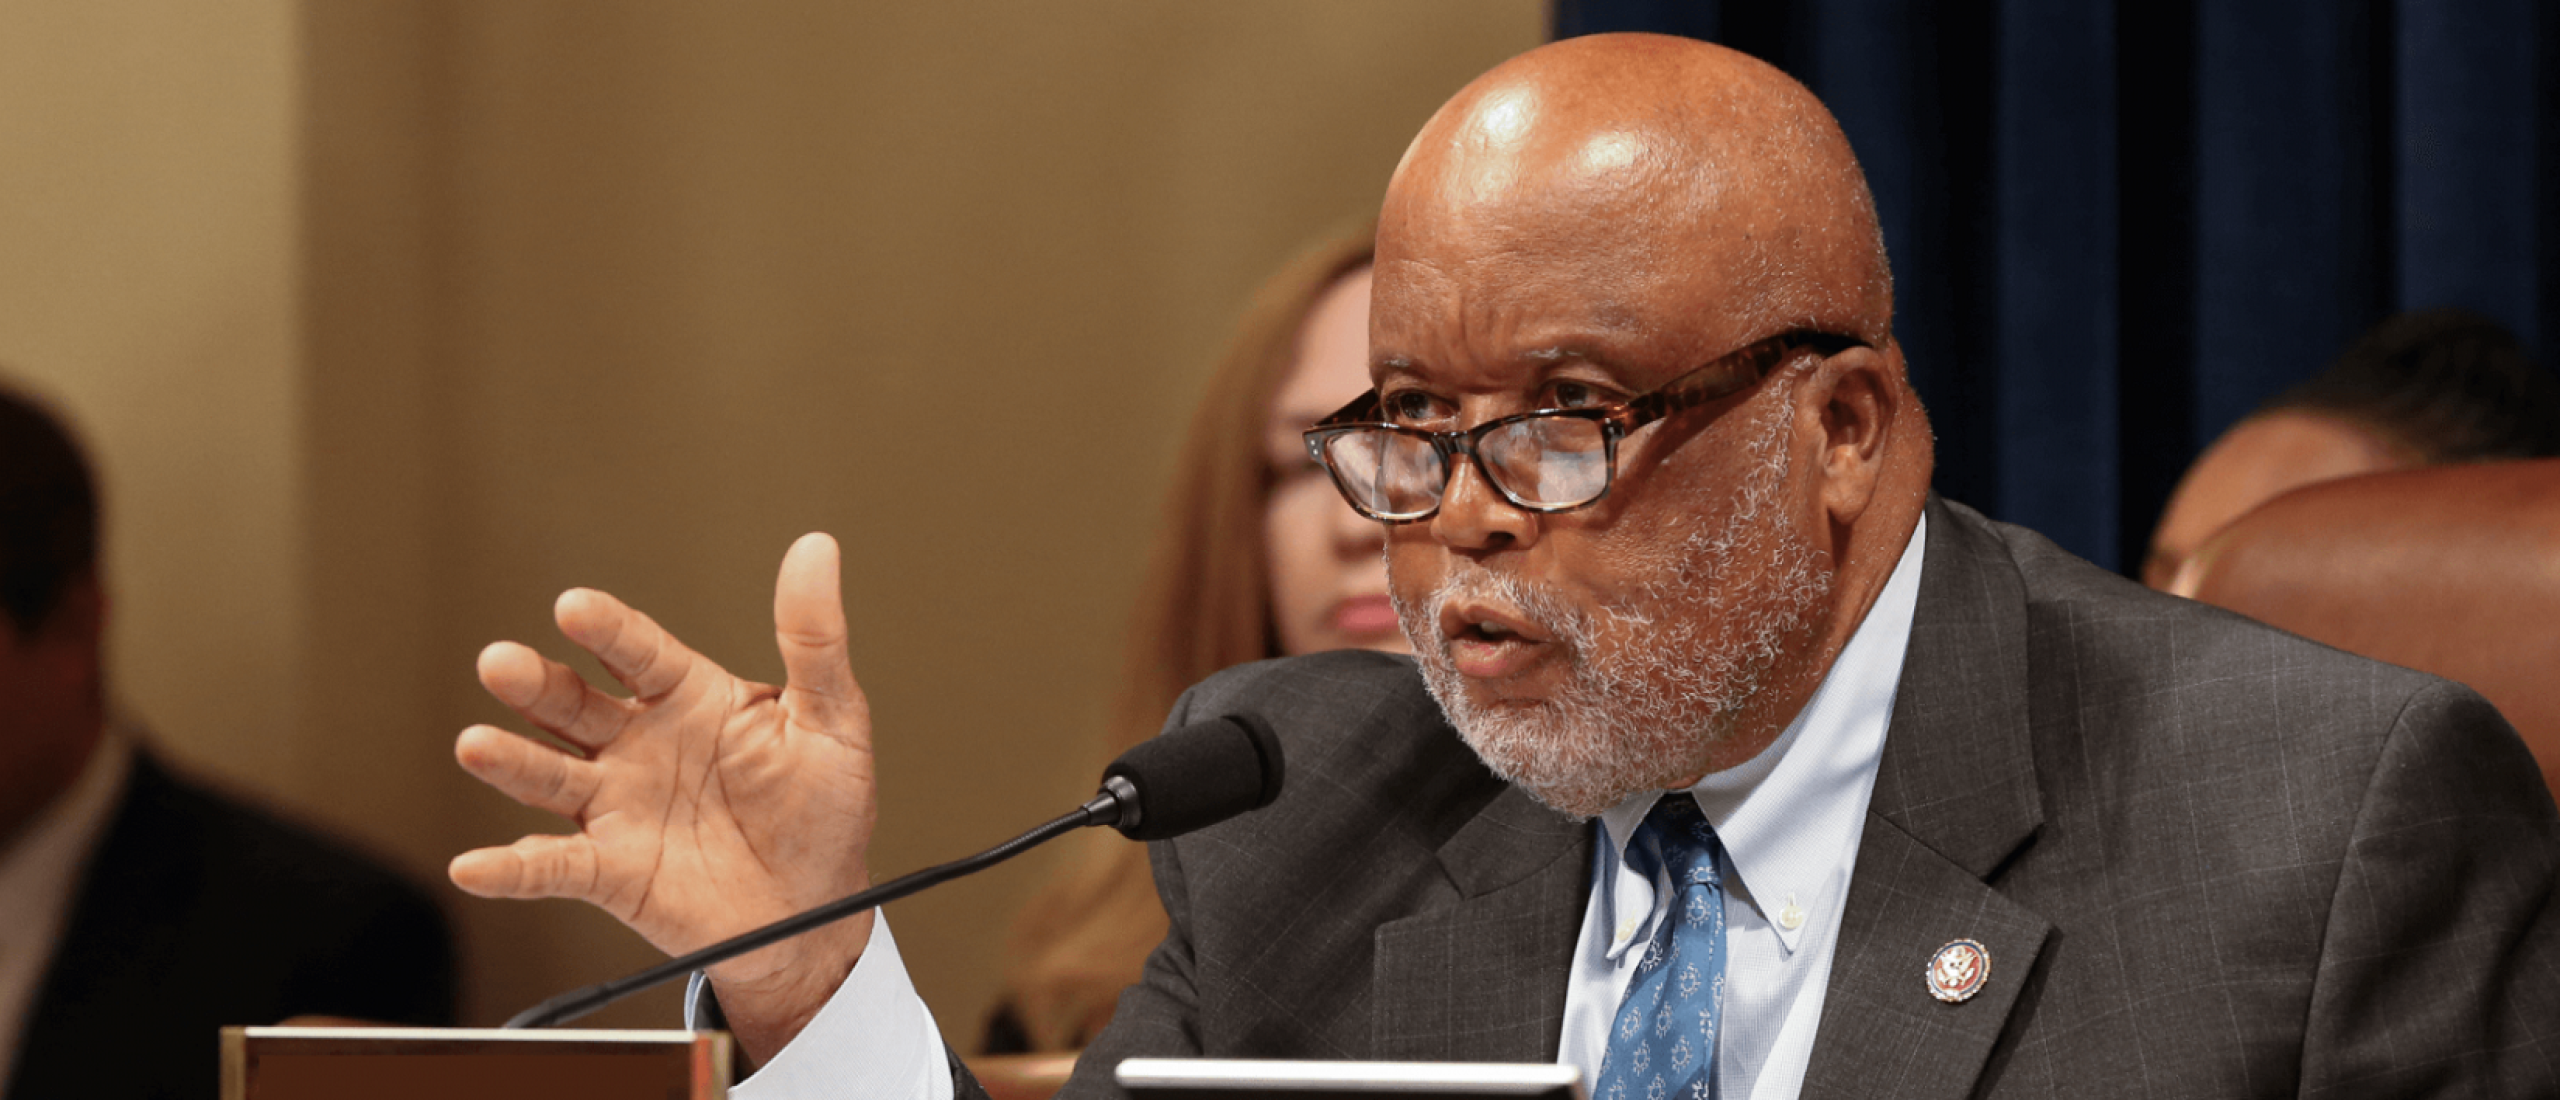 U.S. Rep. Bennie Thompson, D-Miss., chairs the House Jan. 6 committee investigating the Jan. 6 insurrection at the Capitol. Photo credit: U.S. House of Representatives